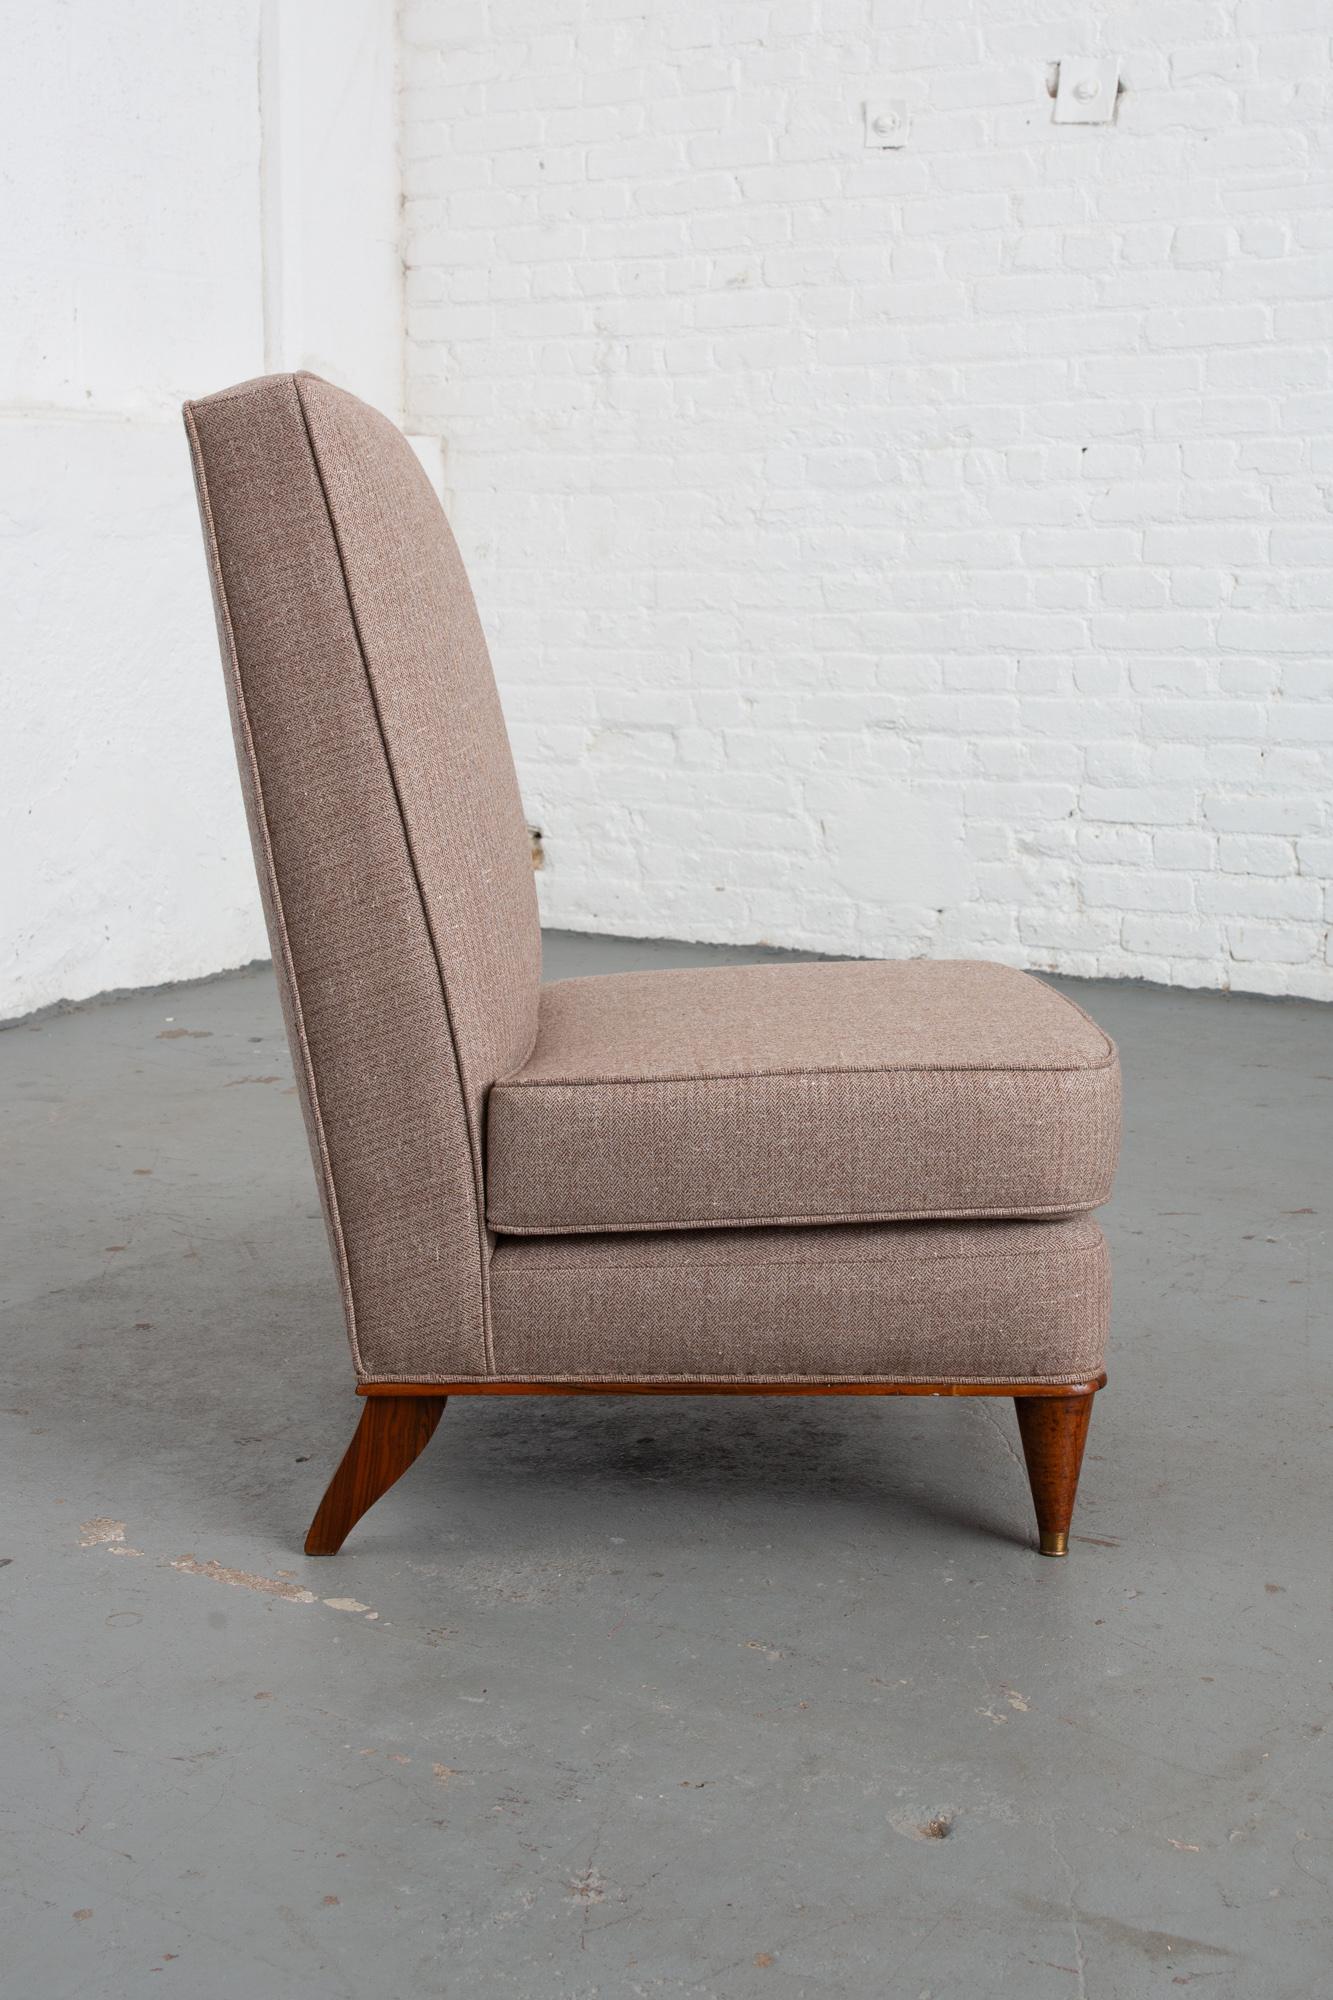 1950s Italian Mid-Century Modern slipper chair with brass sabots to the front and a handsome veneer to the rear legs. Newly upholstered with wool herringbone fabric and single welting. Seat is attached. Good original condition with markings to legs.